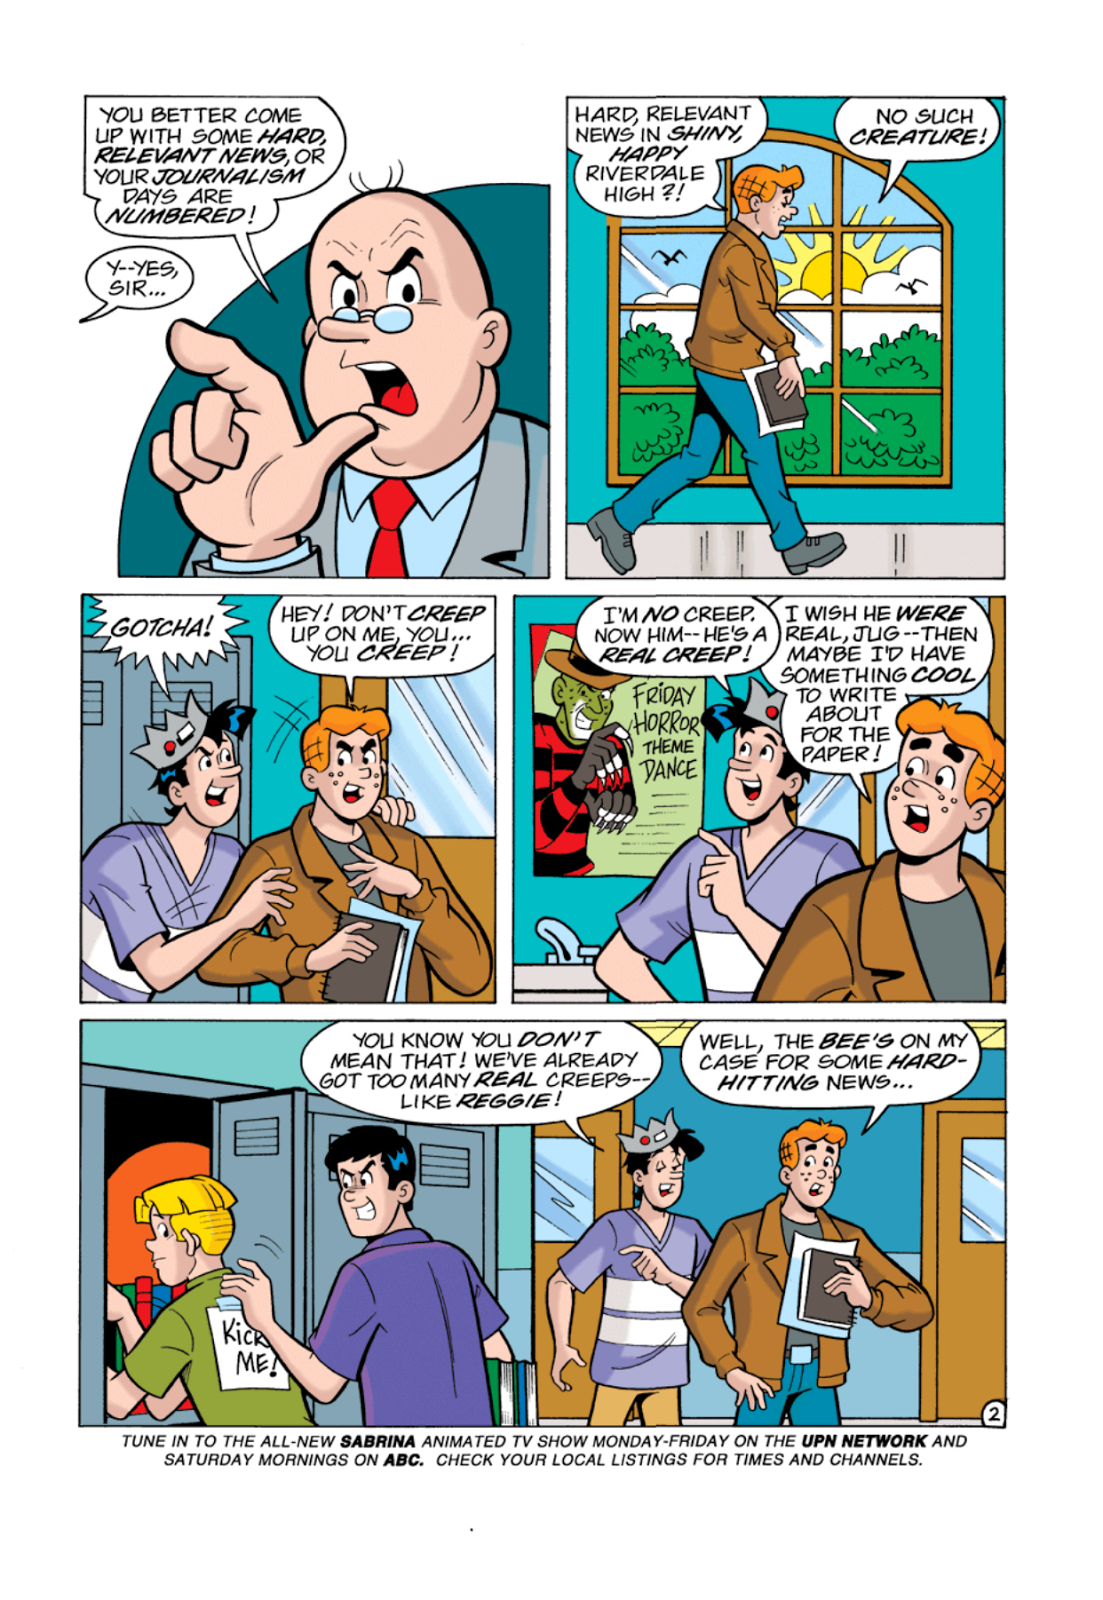 Archies Weird Mysteries 01 | Read Archies Weird Mysteries 01 comic online  in high quality. Read Full Comic online for free - Read comics online in  high quality .